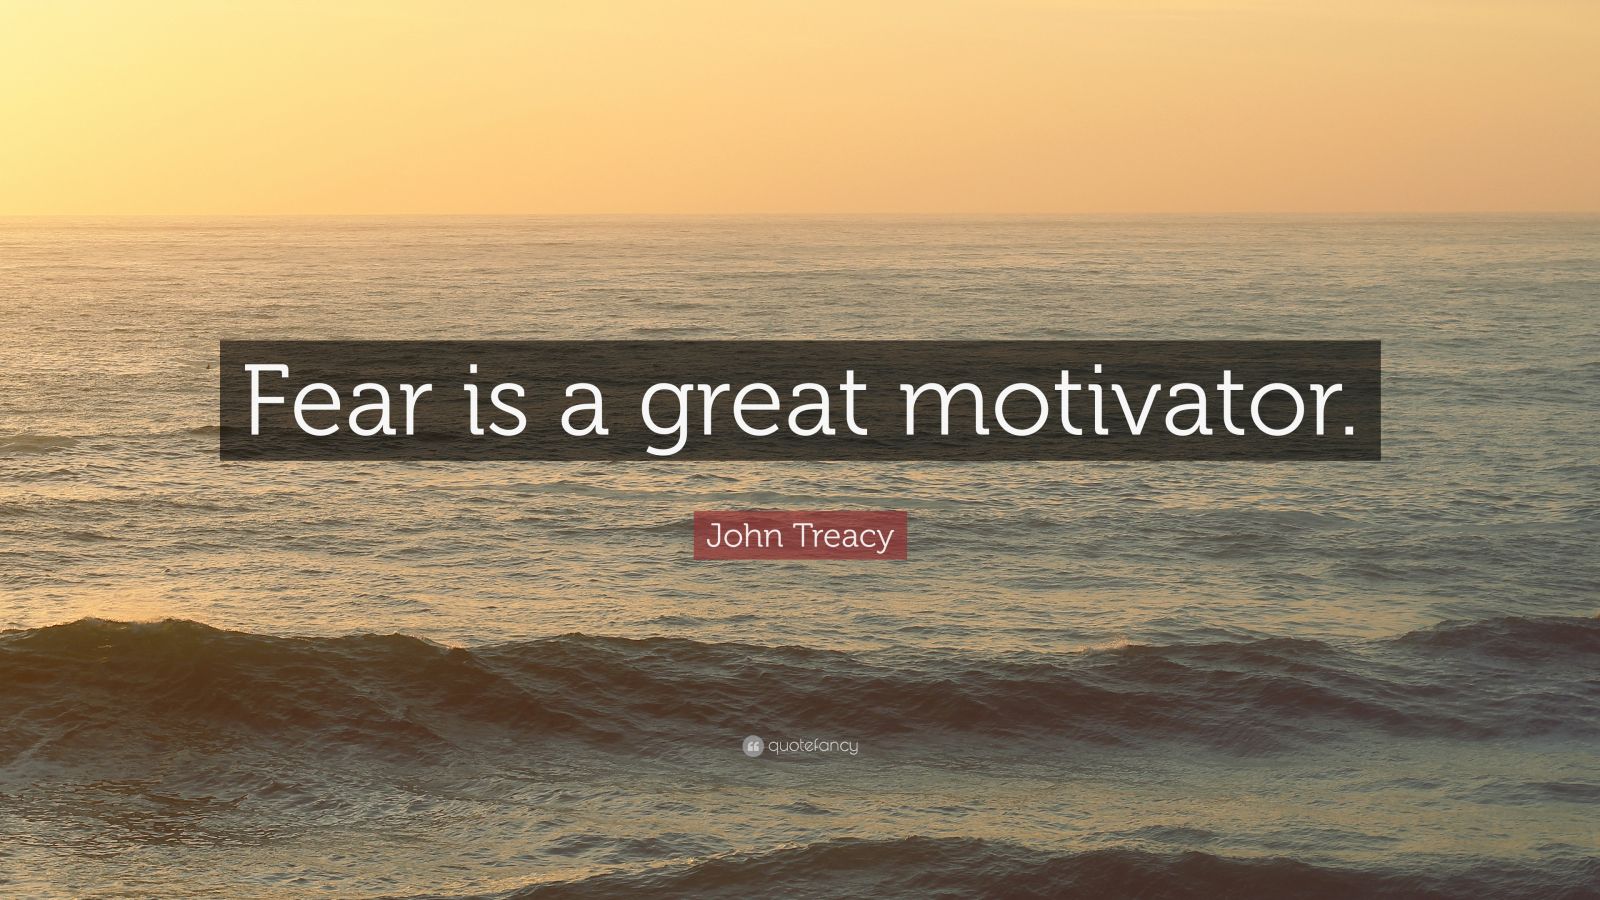 John Treacy Quote: “Fear is a great motivator.” (9 wallpapers) - Quotefancy